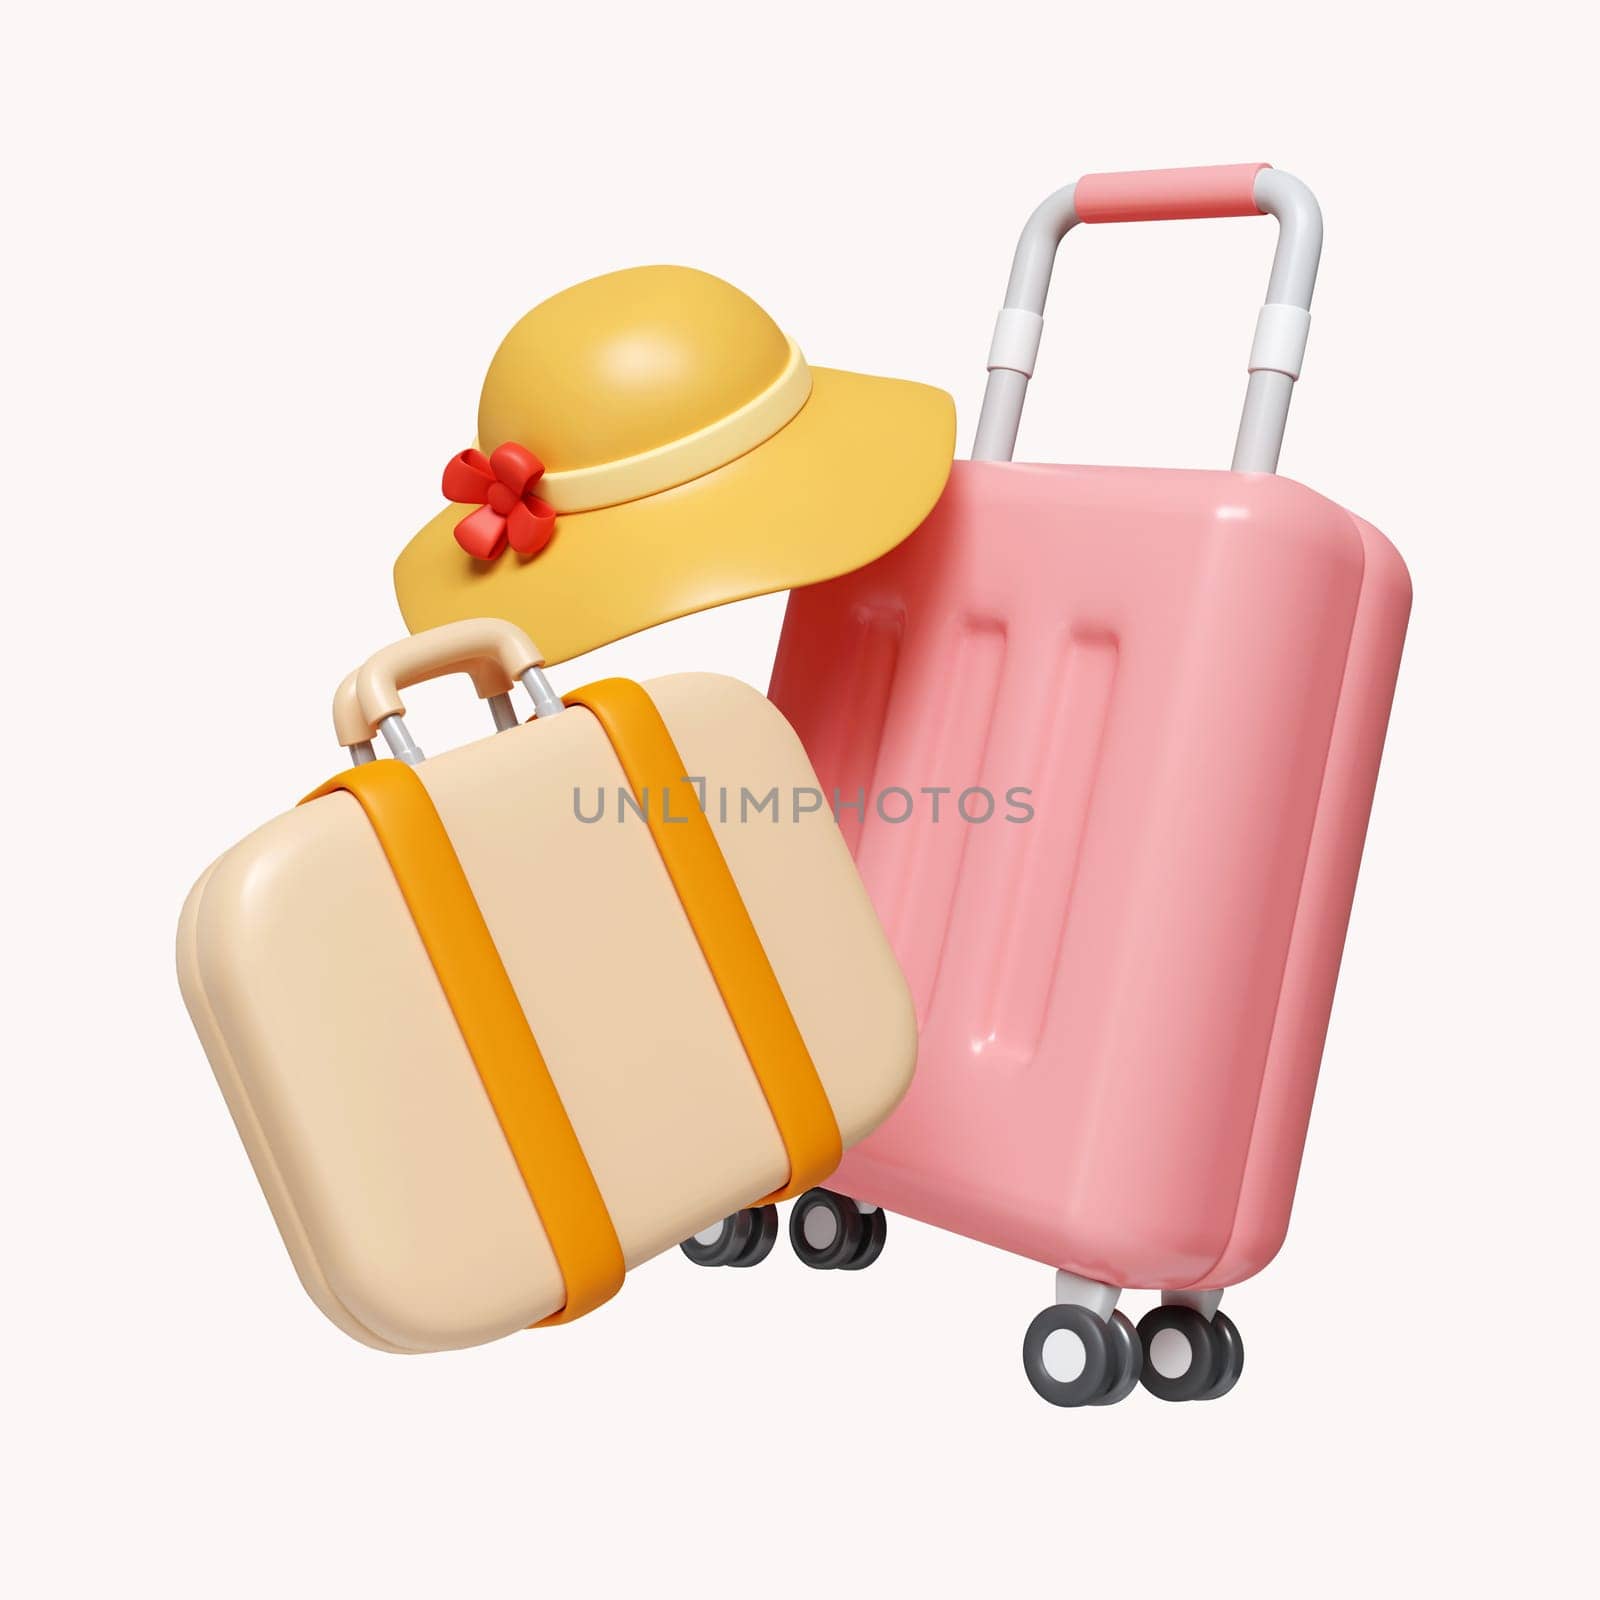 3d Time to travel. luggage and hat icon. summer vacation and holidays concept. icon isolated on white background. 3d rendering illustration. Clipping path. by meepiangraphic